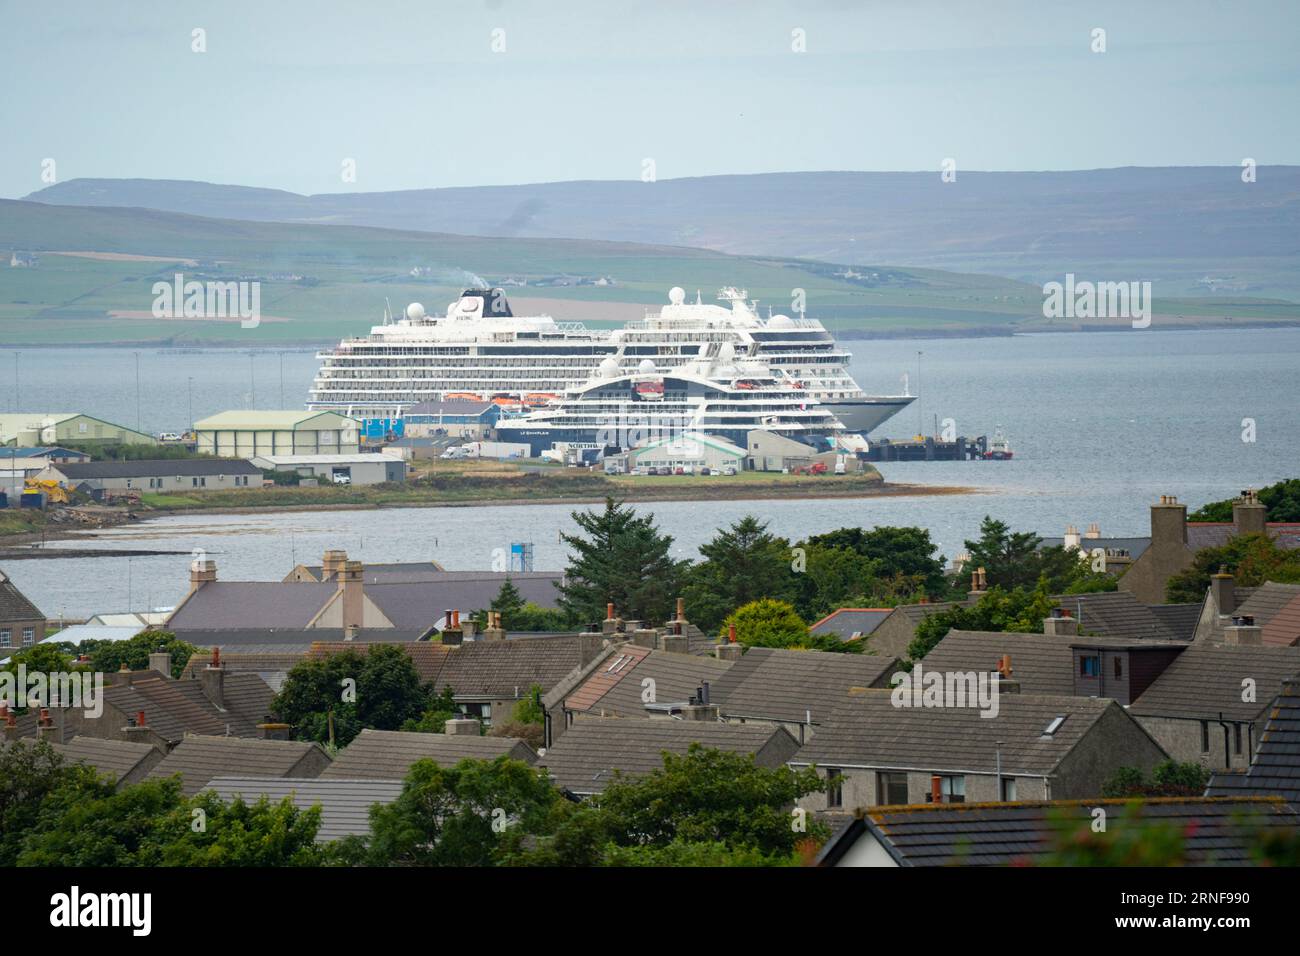 Stromness, Orkney,  Scotland, UK. 1st September 2023. American tourists from visiting cruise ships berthed at Kirkwall visit the Ring of Brodgar neolithic standing stone circle on Orkney. Concerns have been raised by locals that cruise ships are bringing too many tourists to the Islands and current infrastructure cannot cope. Pic; Cruise ships moored at Kirkwall port. Iain Masterton/Alamy Live News Stock Photo